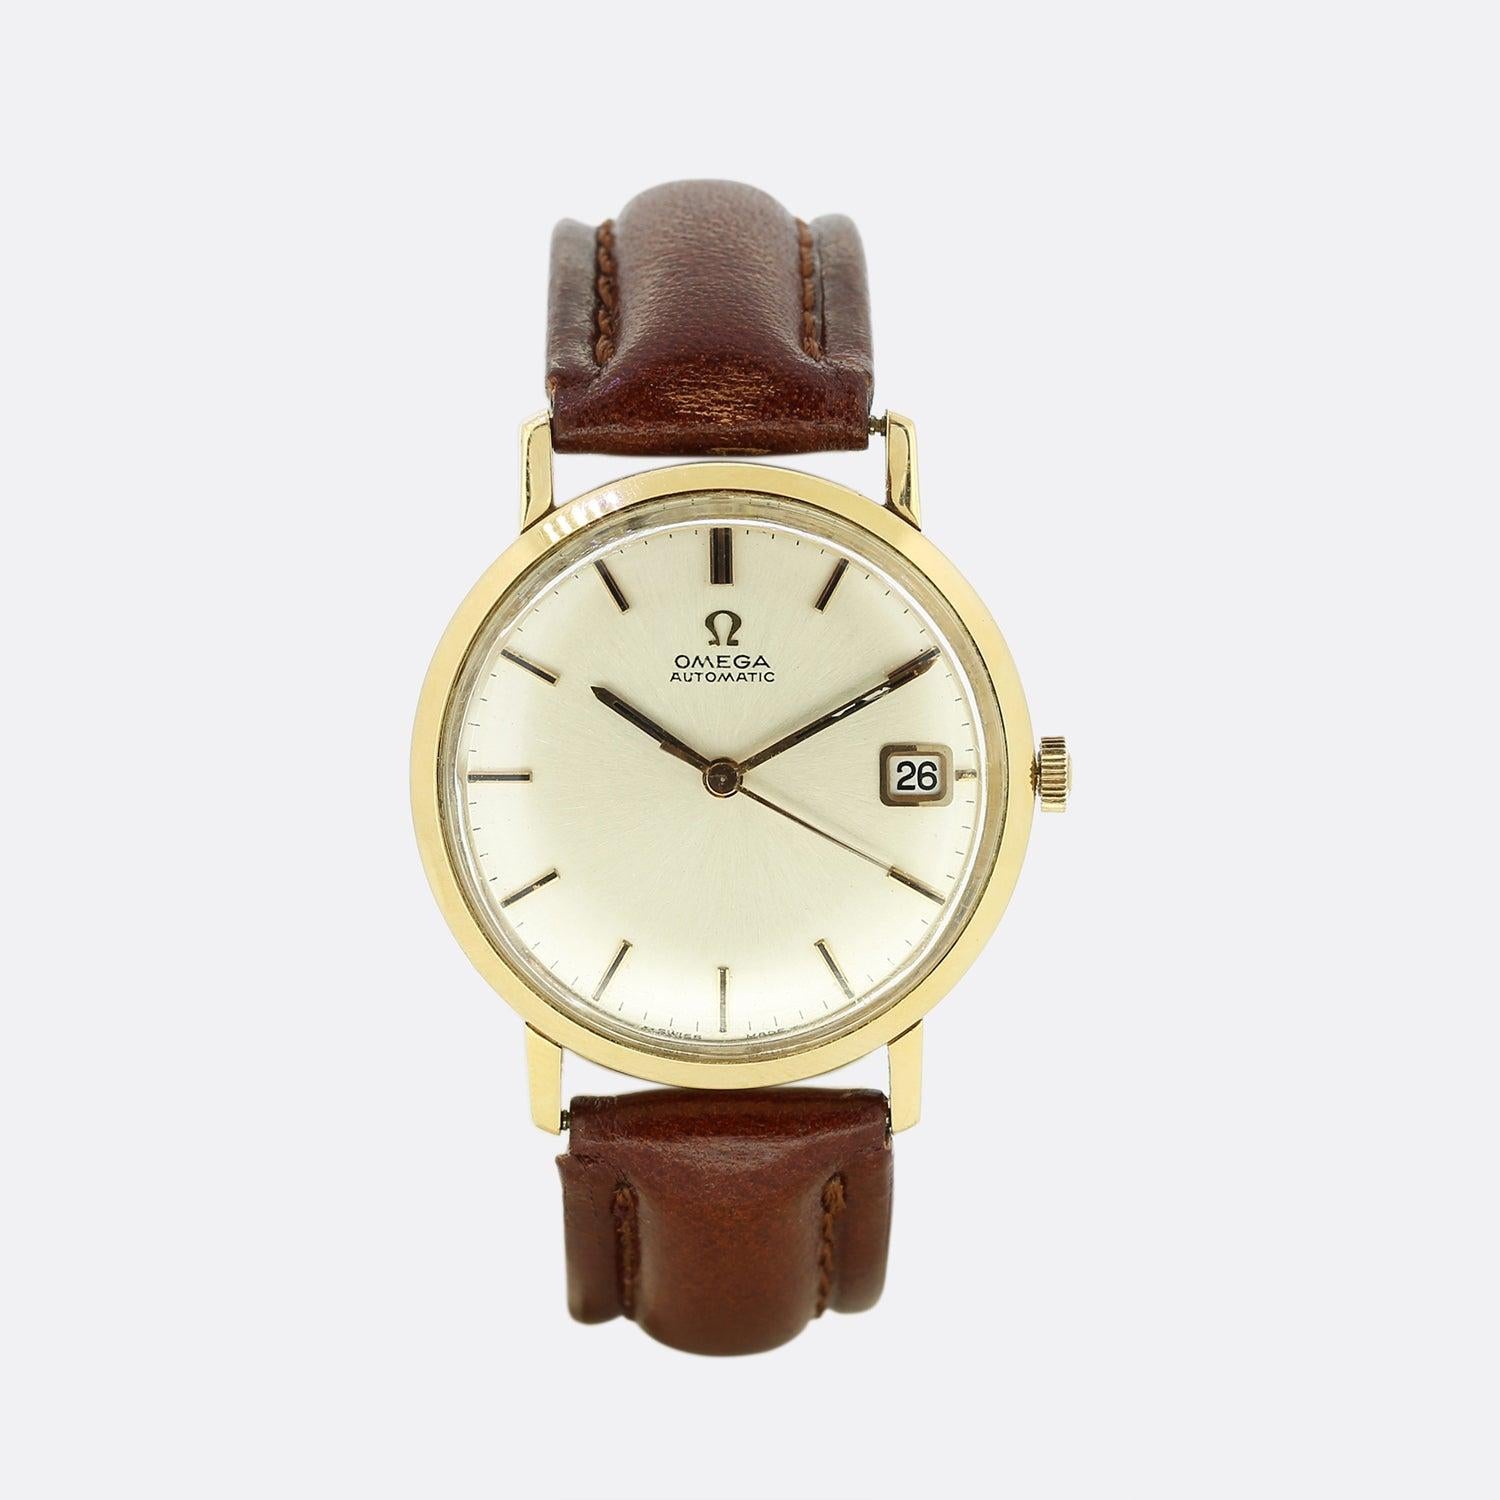 This is a vintage 18ct yellow gold Omega automatic wristwatch. The watch features all its original parts including the case, dial and crown. However, the strap has been replaced at some point. 

Omega classic timepieces have been worn by many